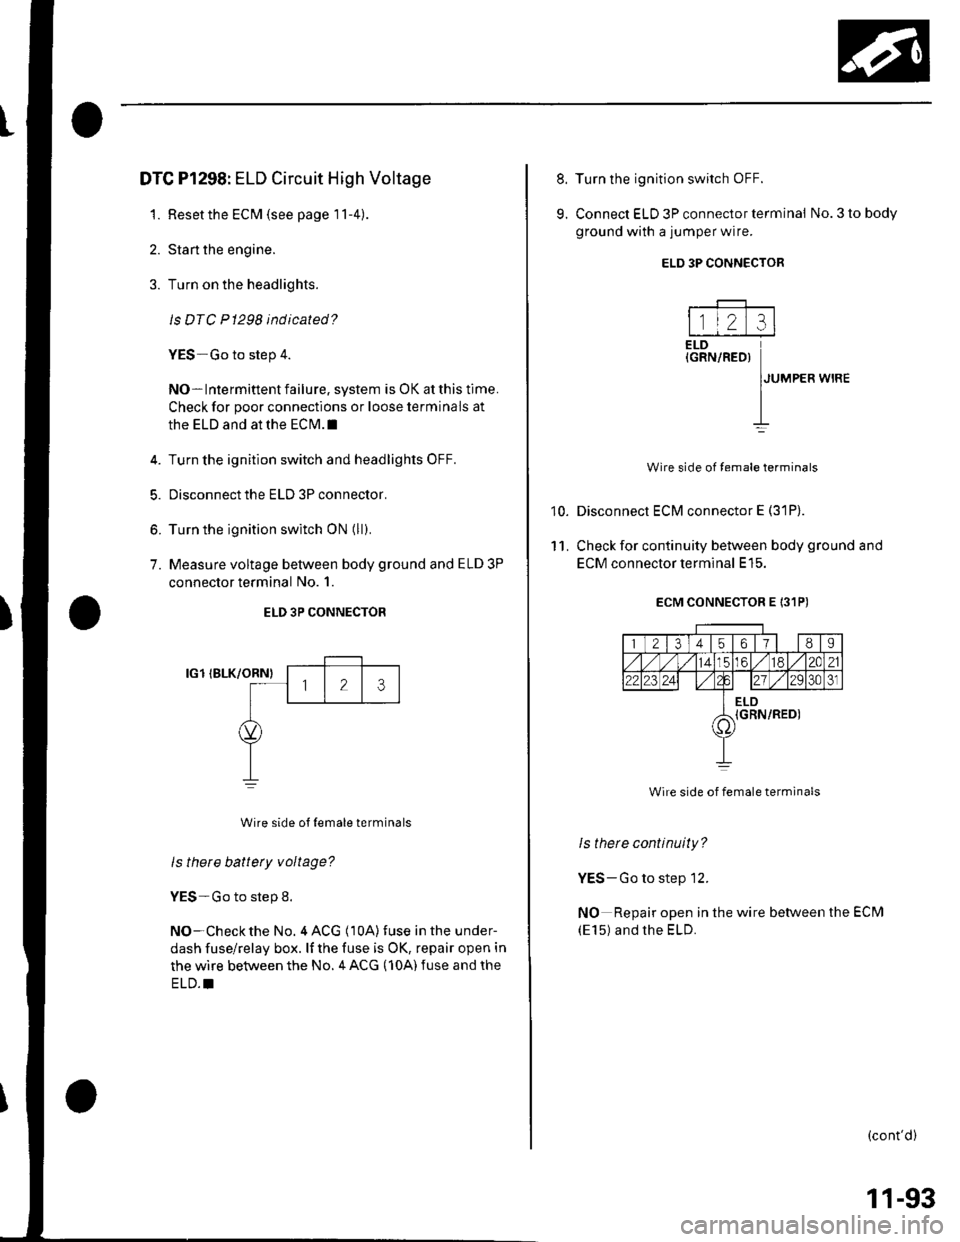 HONDA CIVIC 2003 7.G Workshop Manual DTC Pl298: ELD Circuit High Voltage
1. Resetthe ECM (see page 11-4)
2. Stan the engine.
3. Turn on the headlights.
ls DTC P1298 indicated?
YES-Go to step 4.
NO- Intermittent failure. system is OK at t